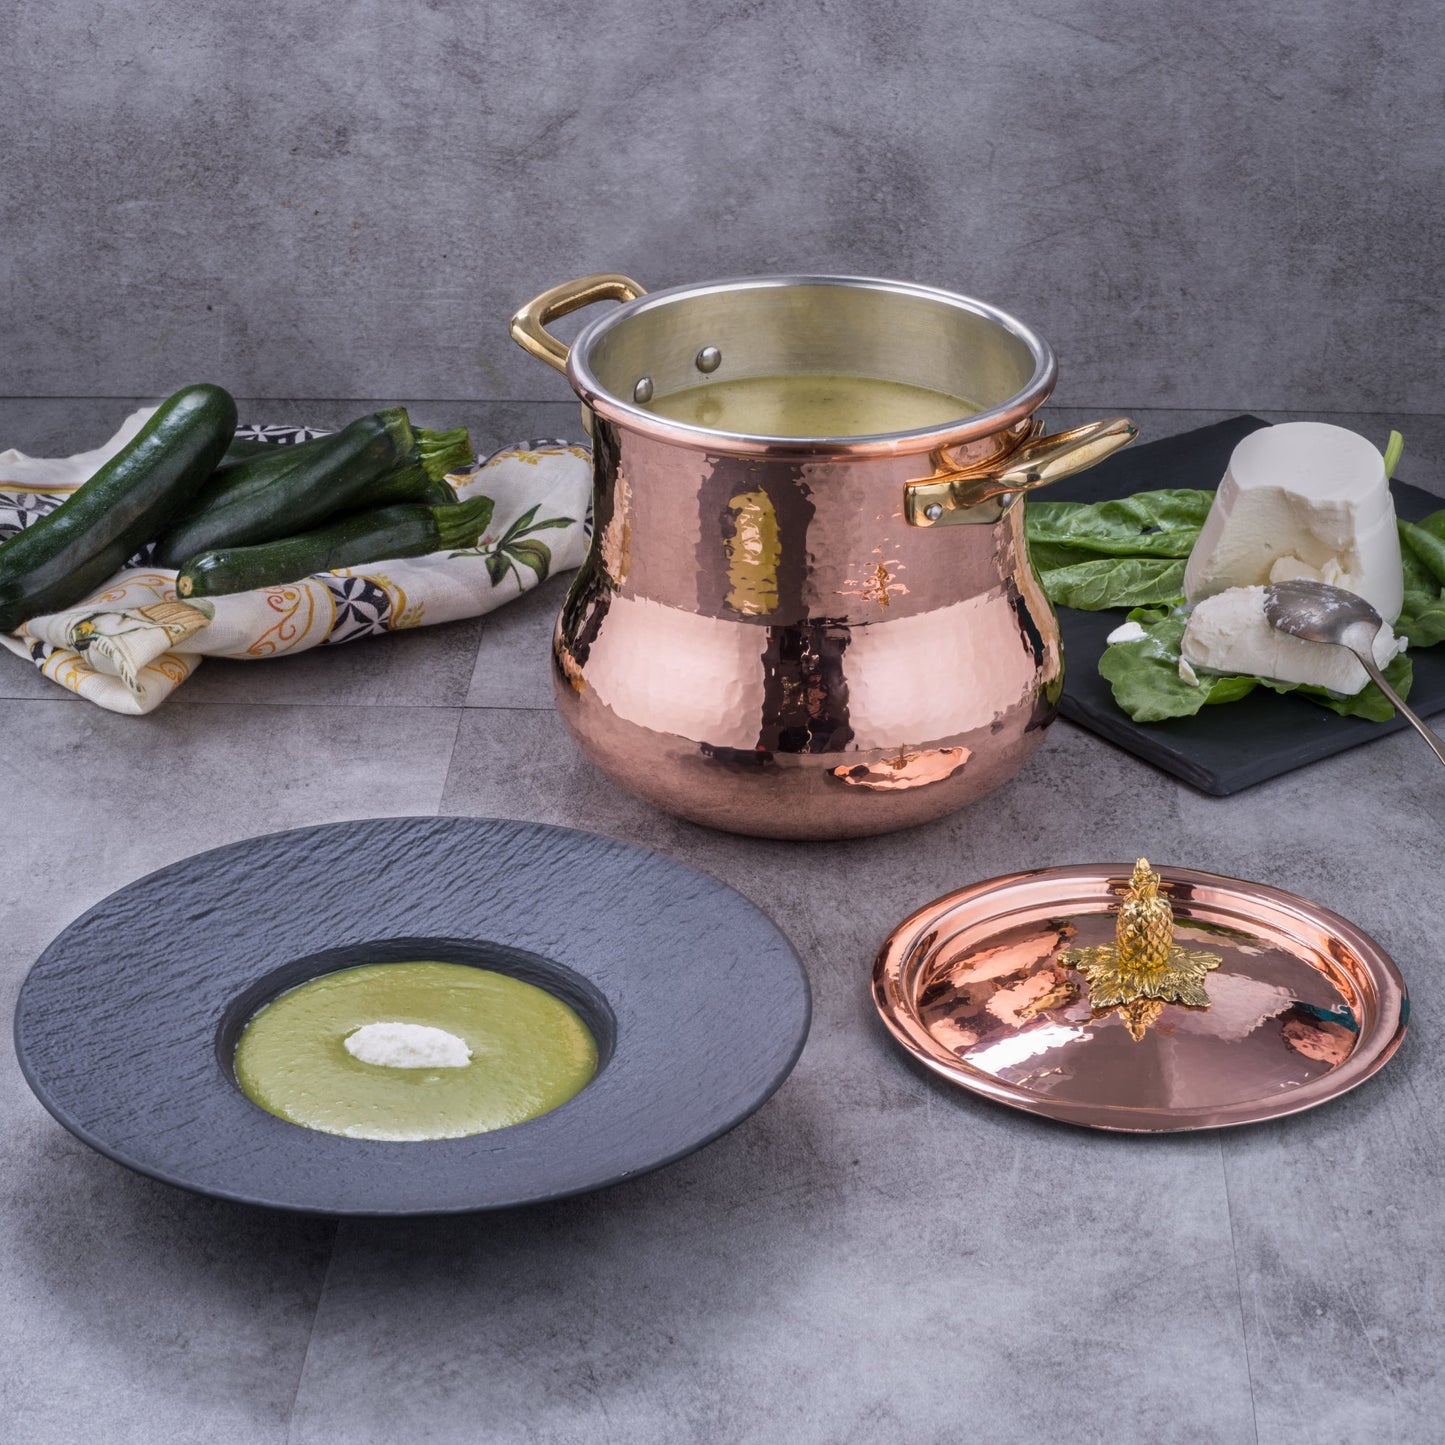 Hammered copper 5 Qt Belly Soup Pot lined with high purity tin applied by hand over fire and bronze handles, from Ruffoni Historia collection